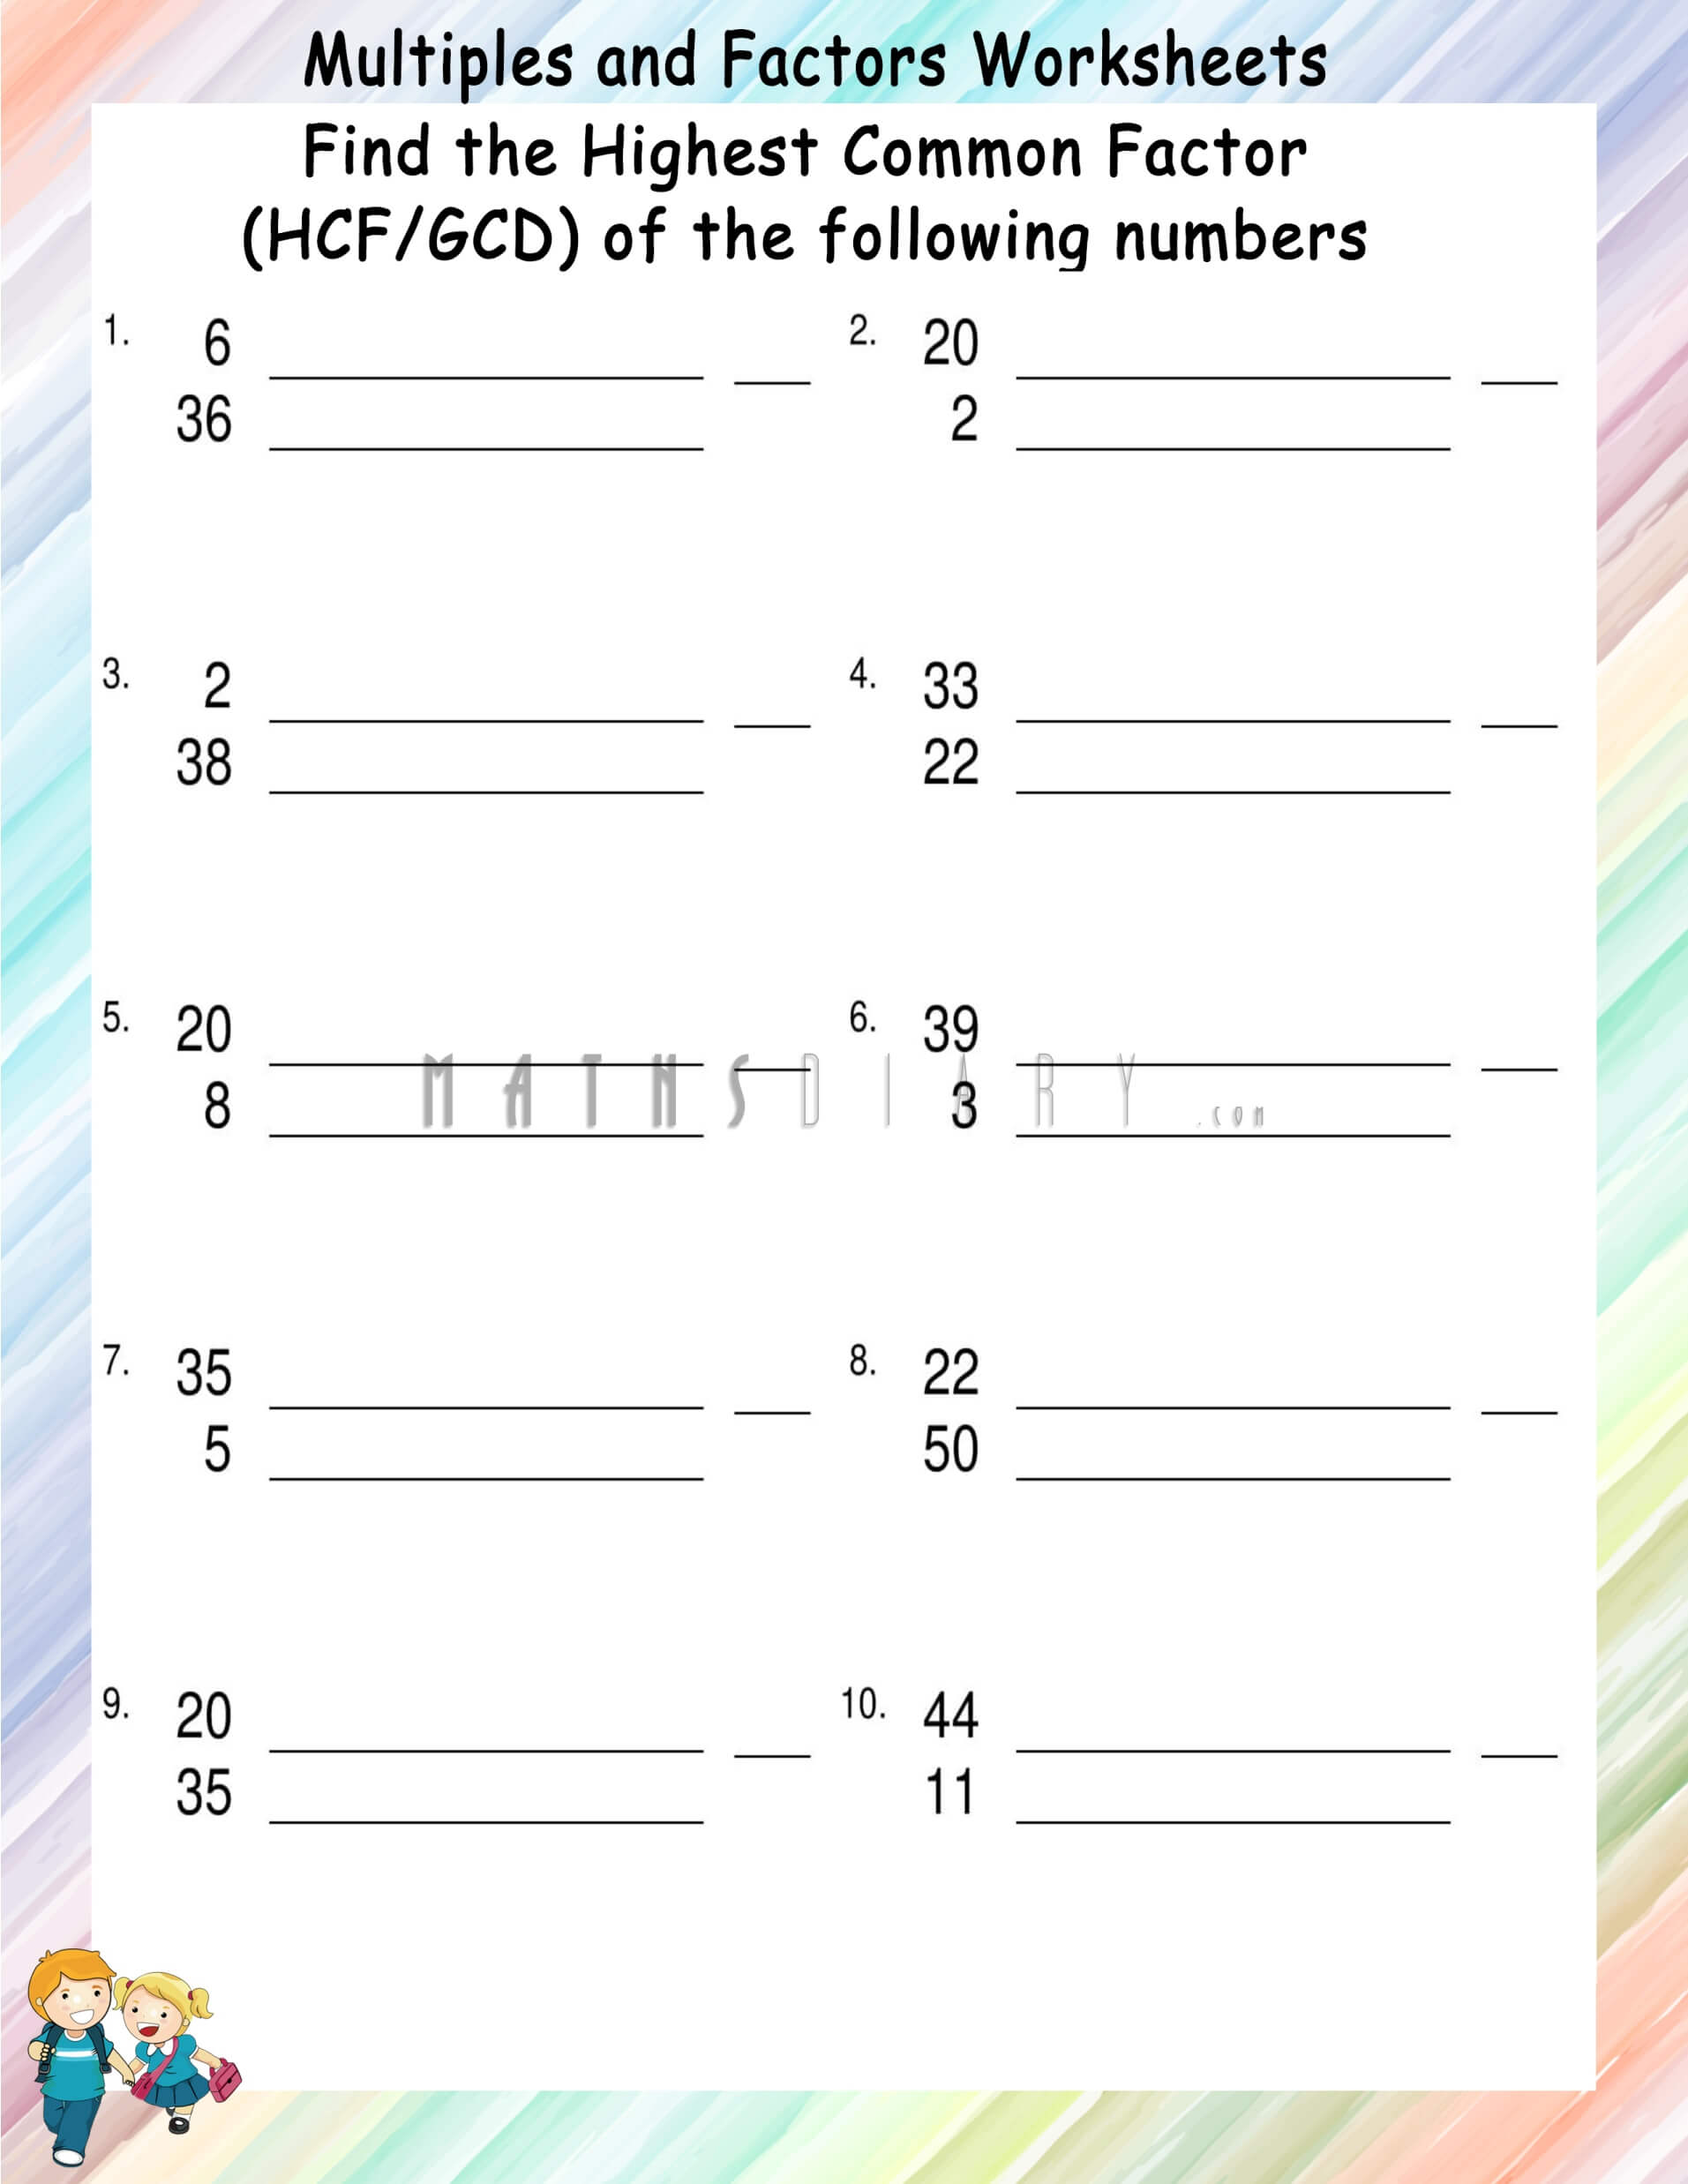 grade-5-factoring-worksheets-greatest-common-factor-of-two-numbers-k5